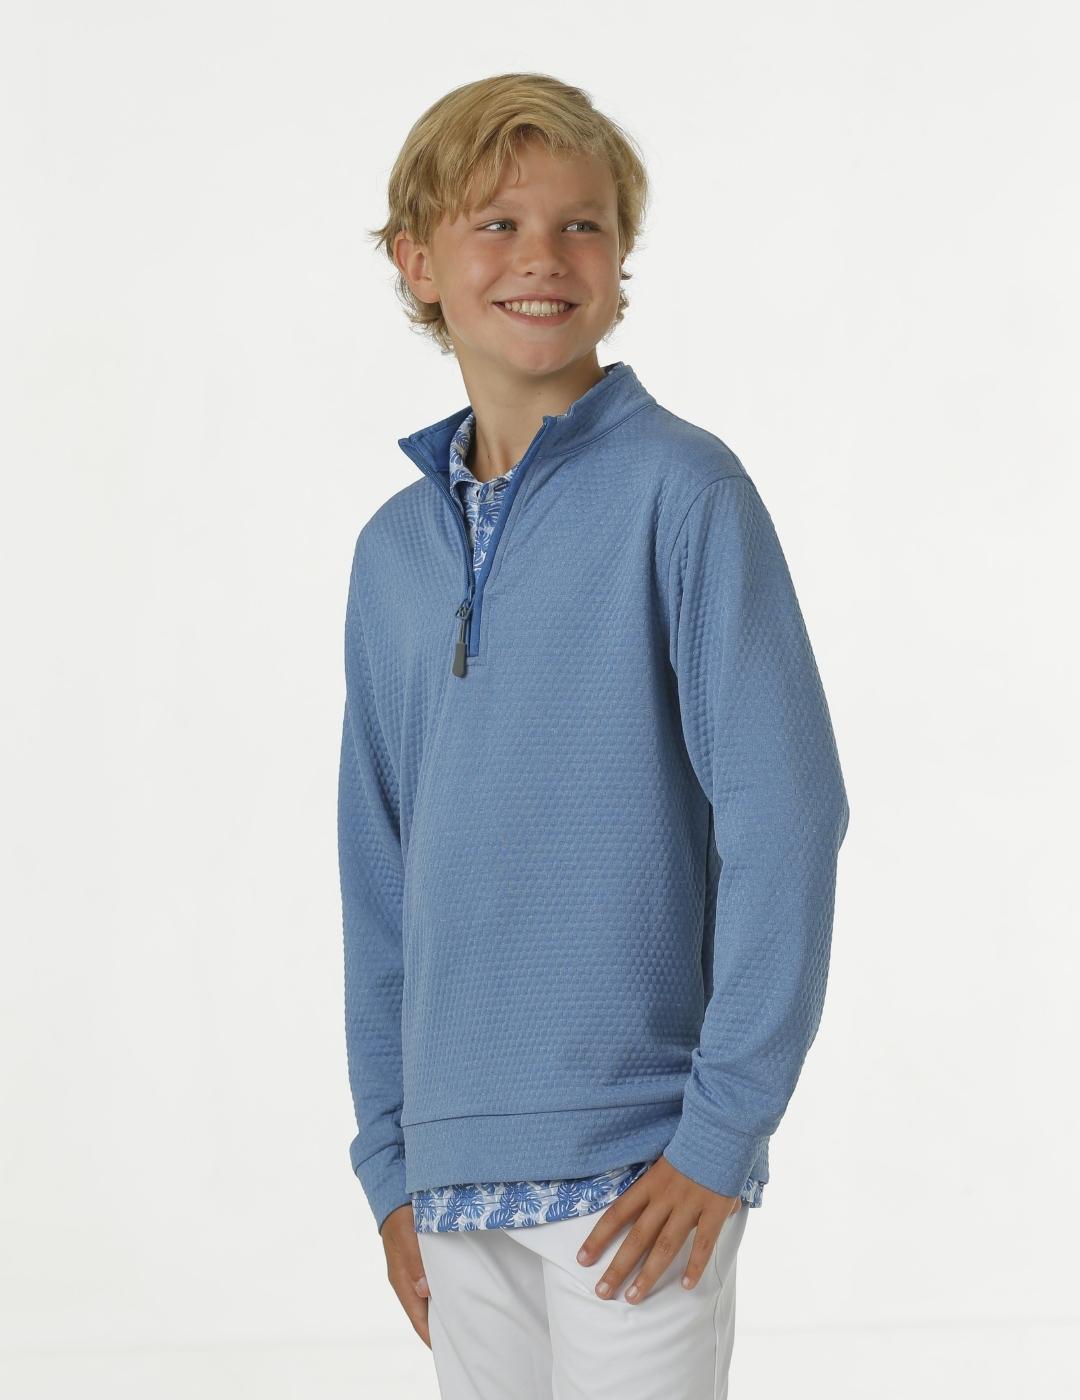 Bodhi Youth Boys' Pullover